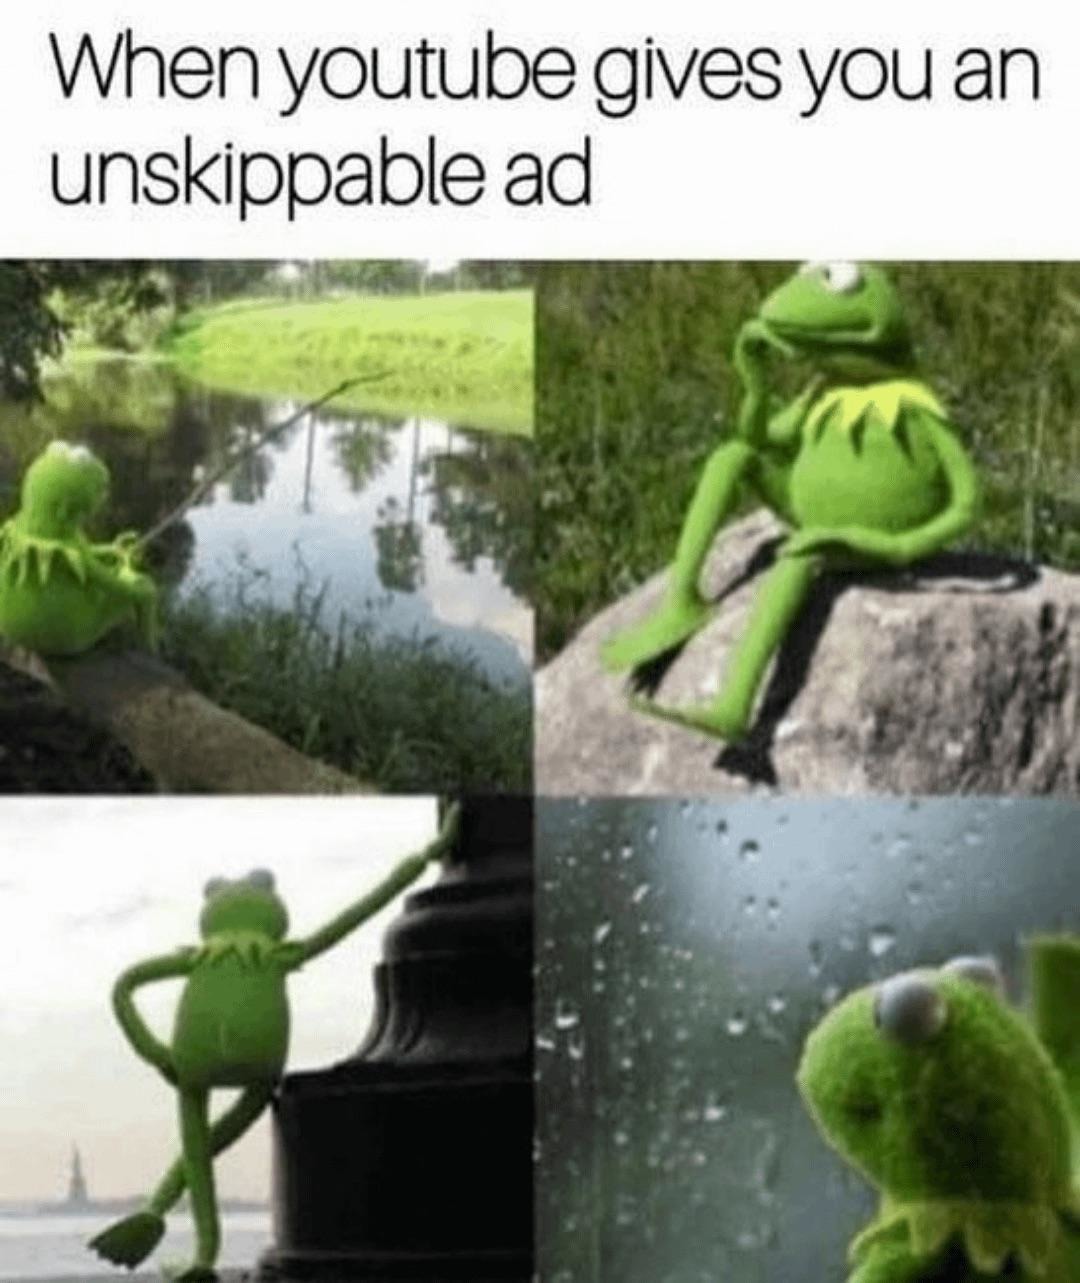 Waiting for the ads to end like - meme